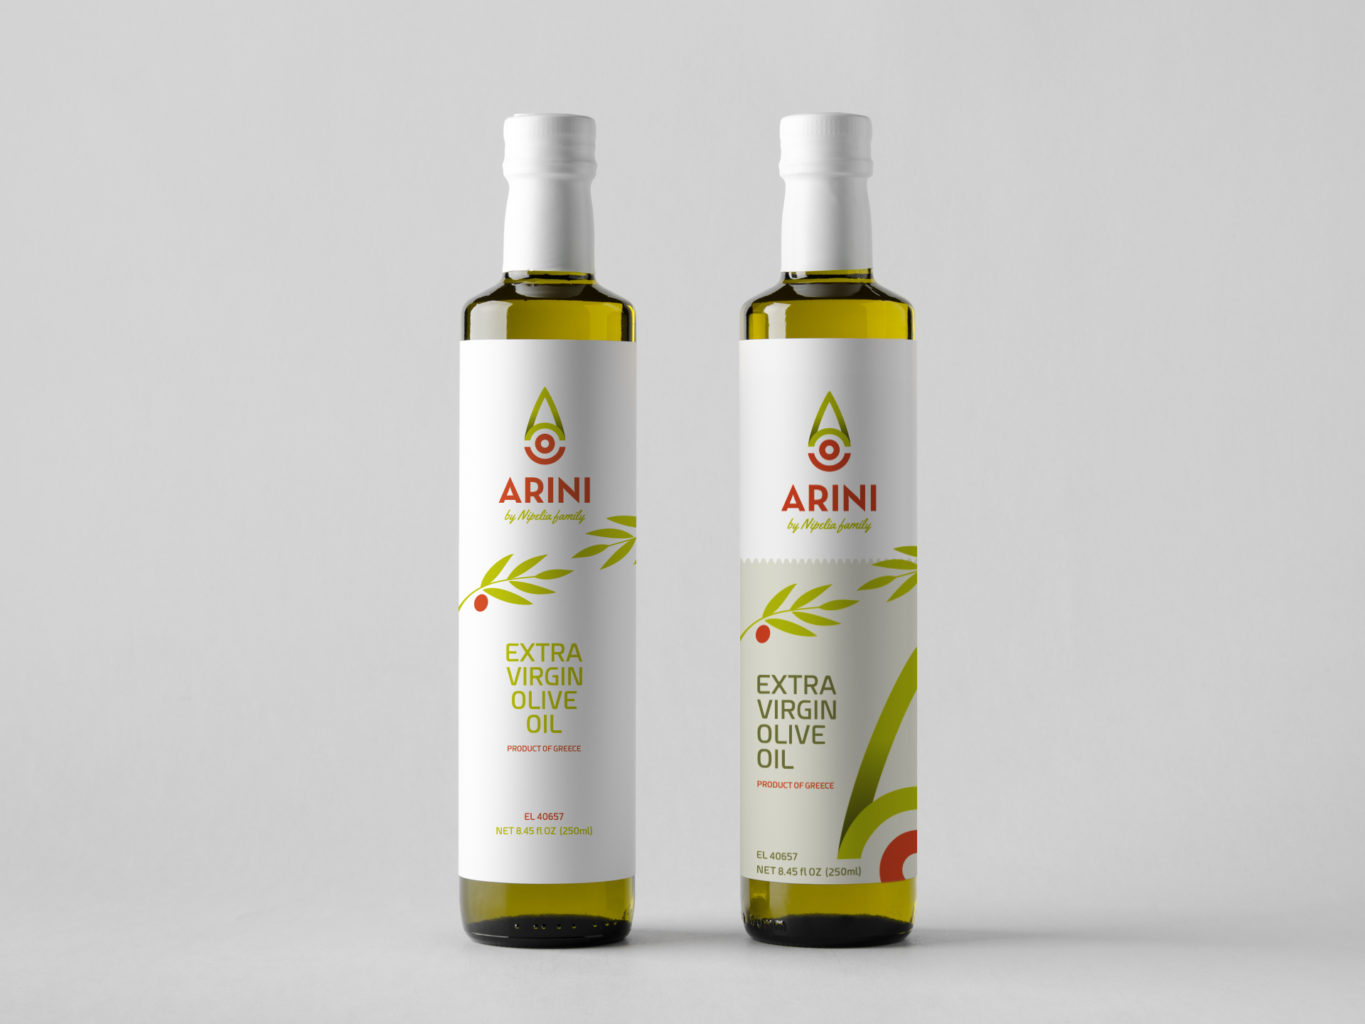 Arini Olive Oil packaging